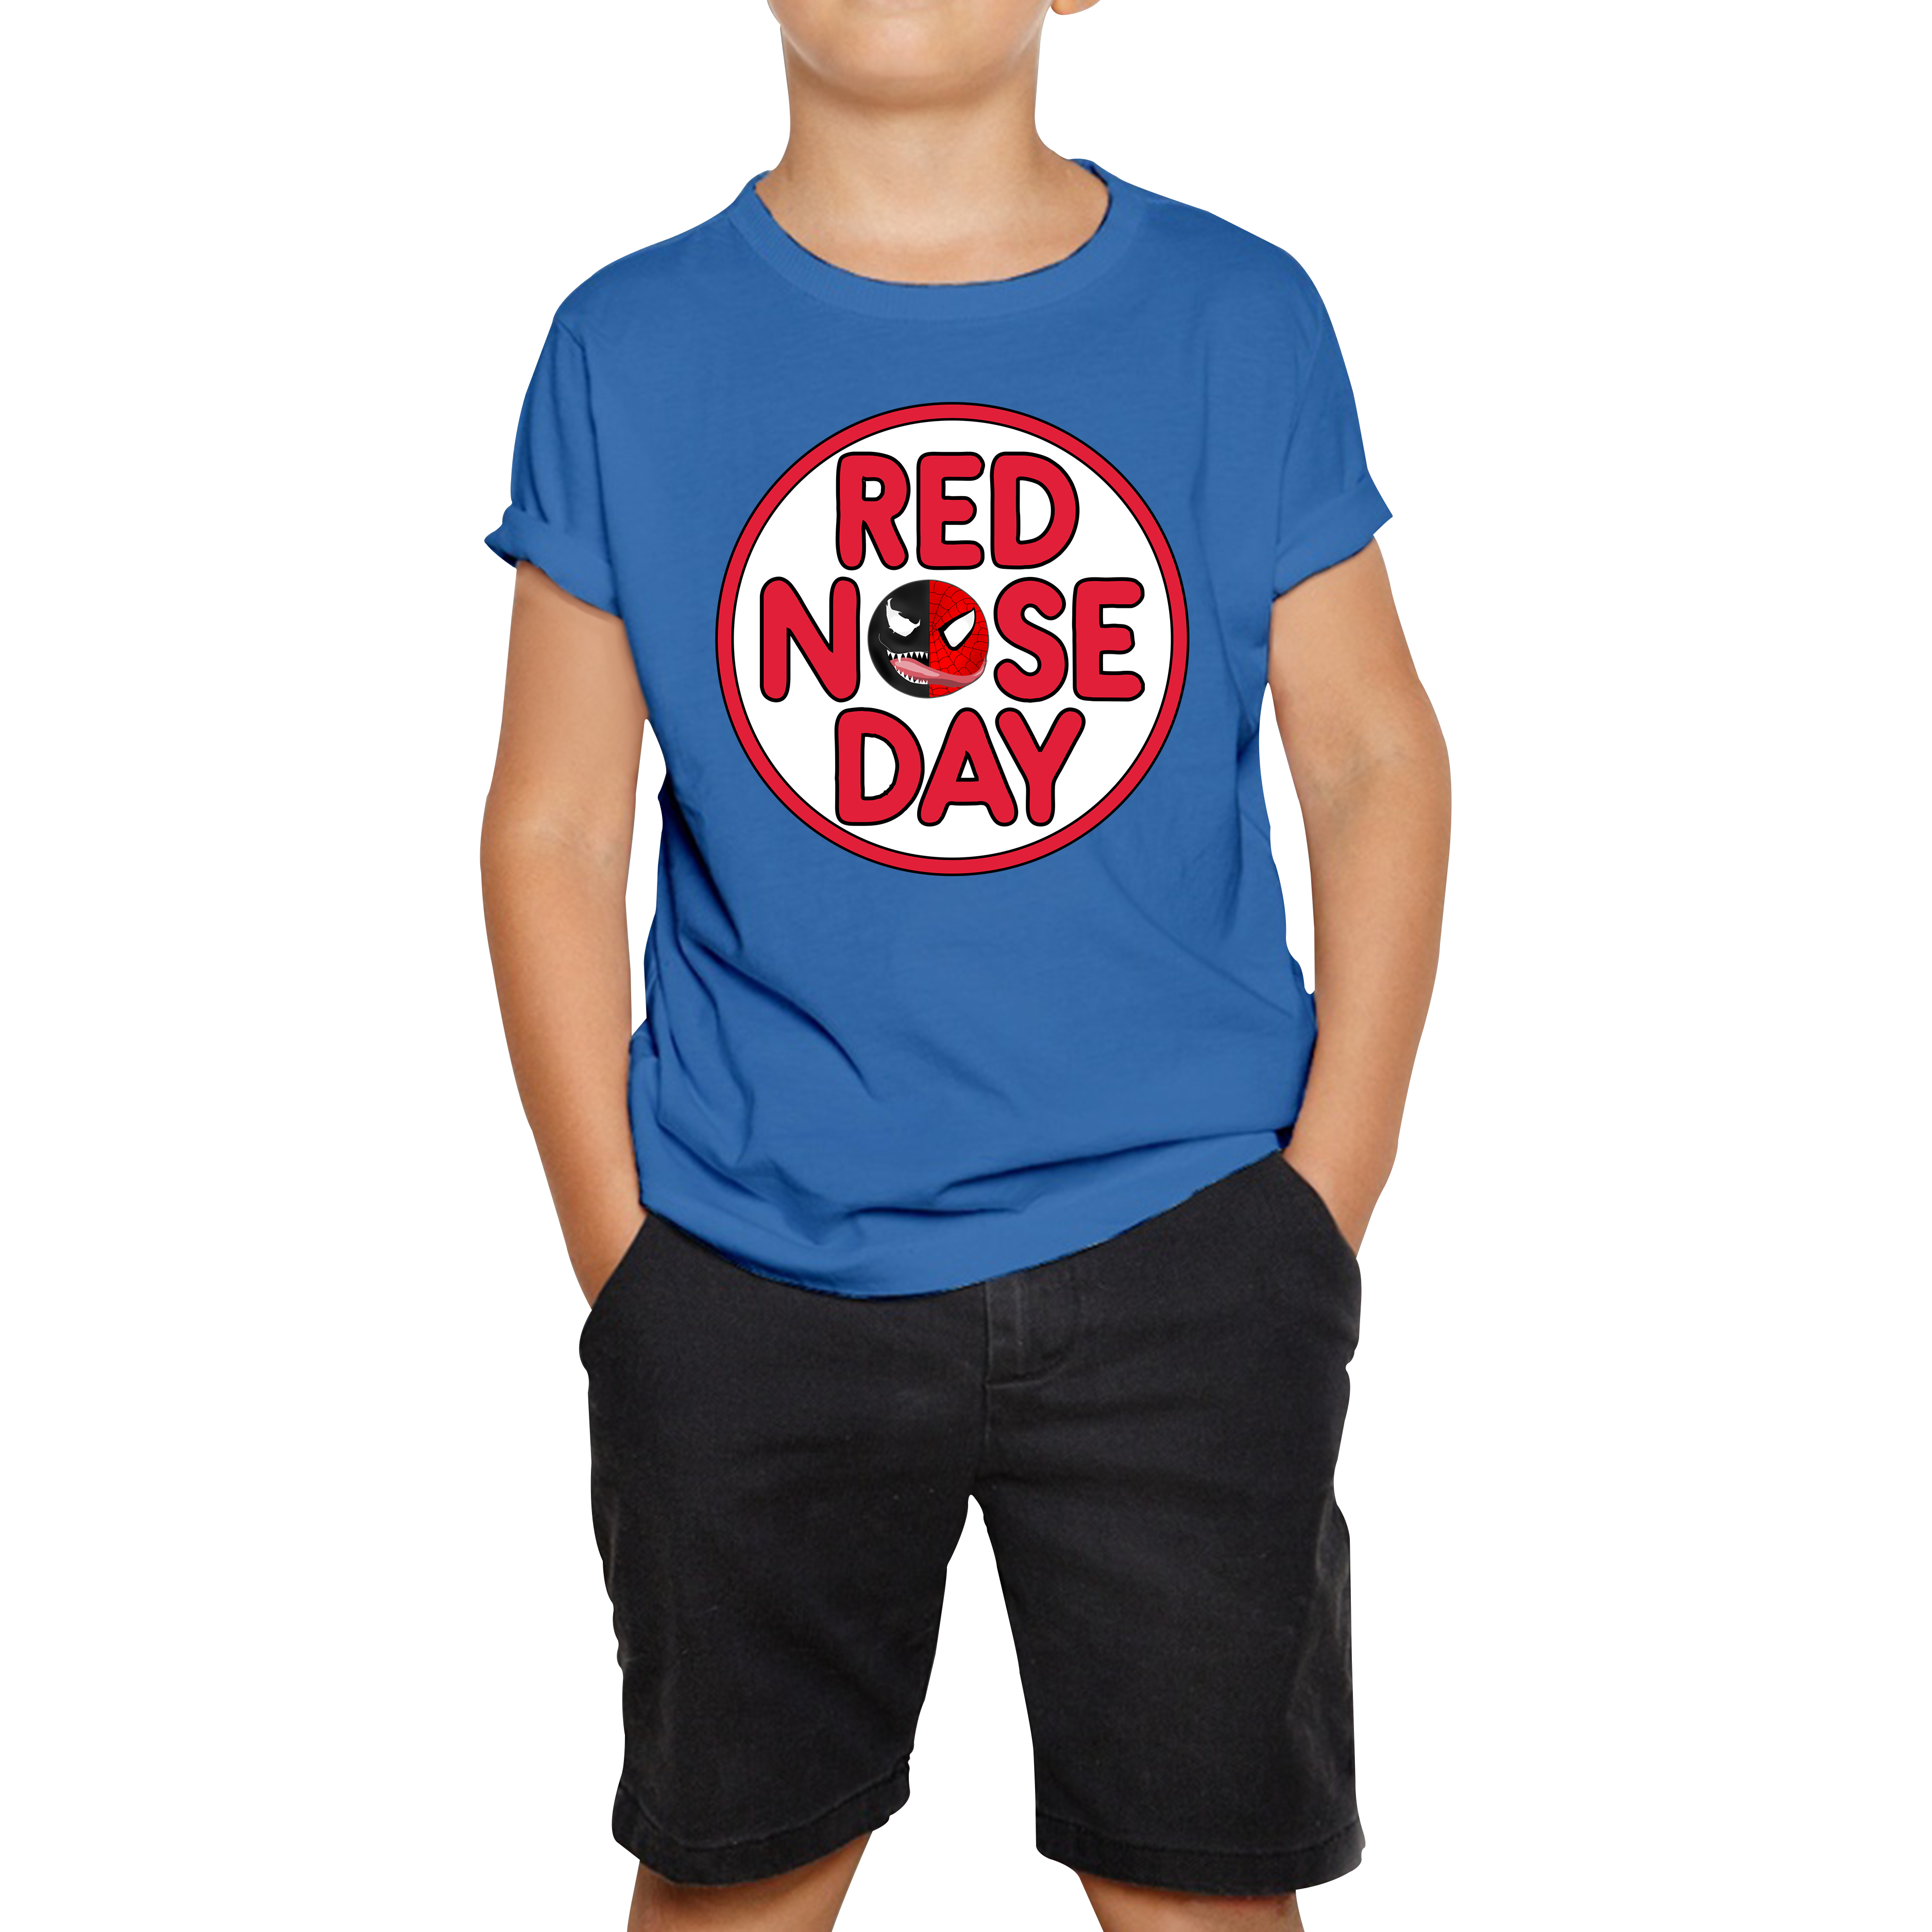 Marvel Venom Spiderman Red Nose Day Kids T Shirt. 50% Goes To Charity